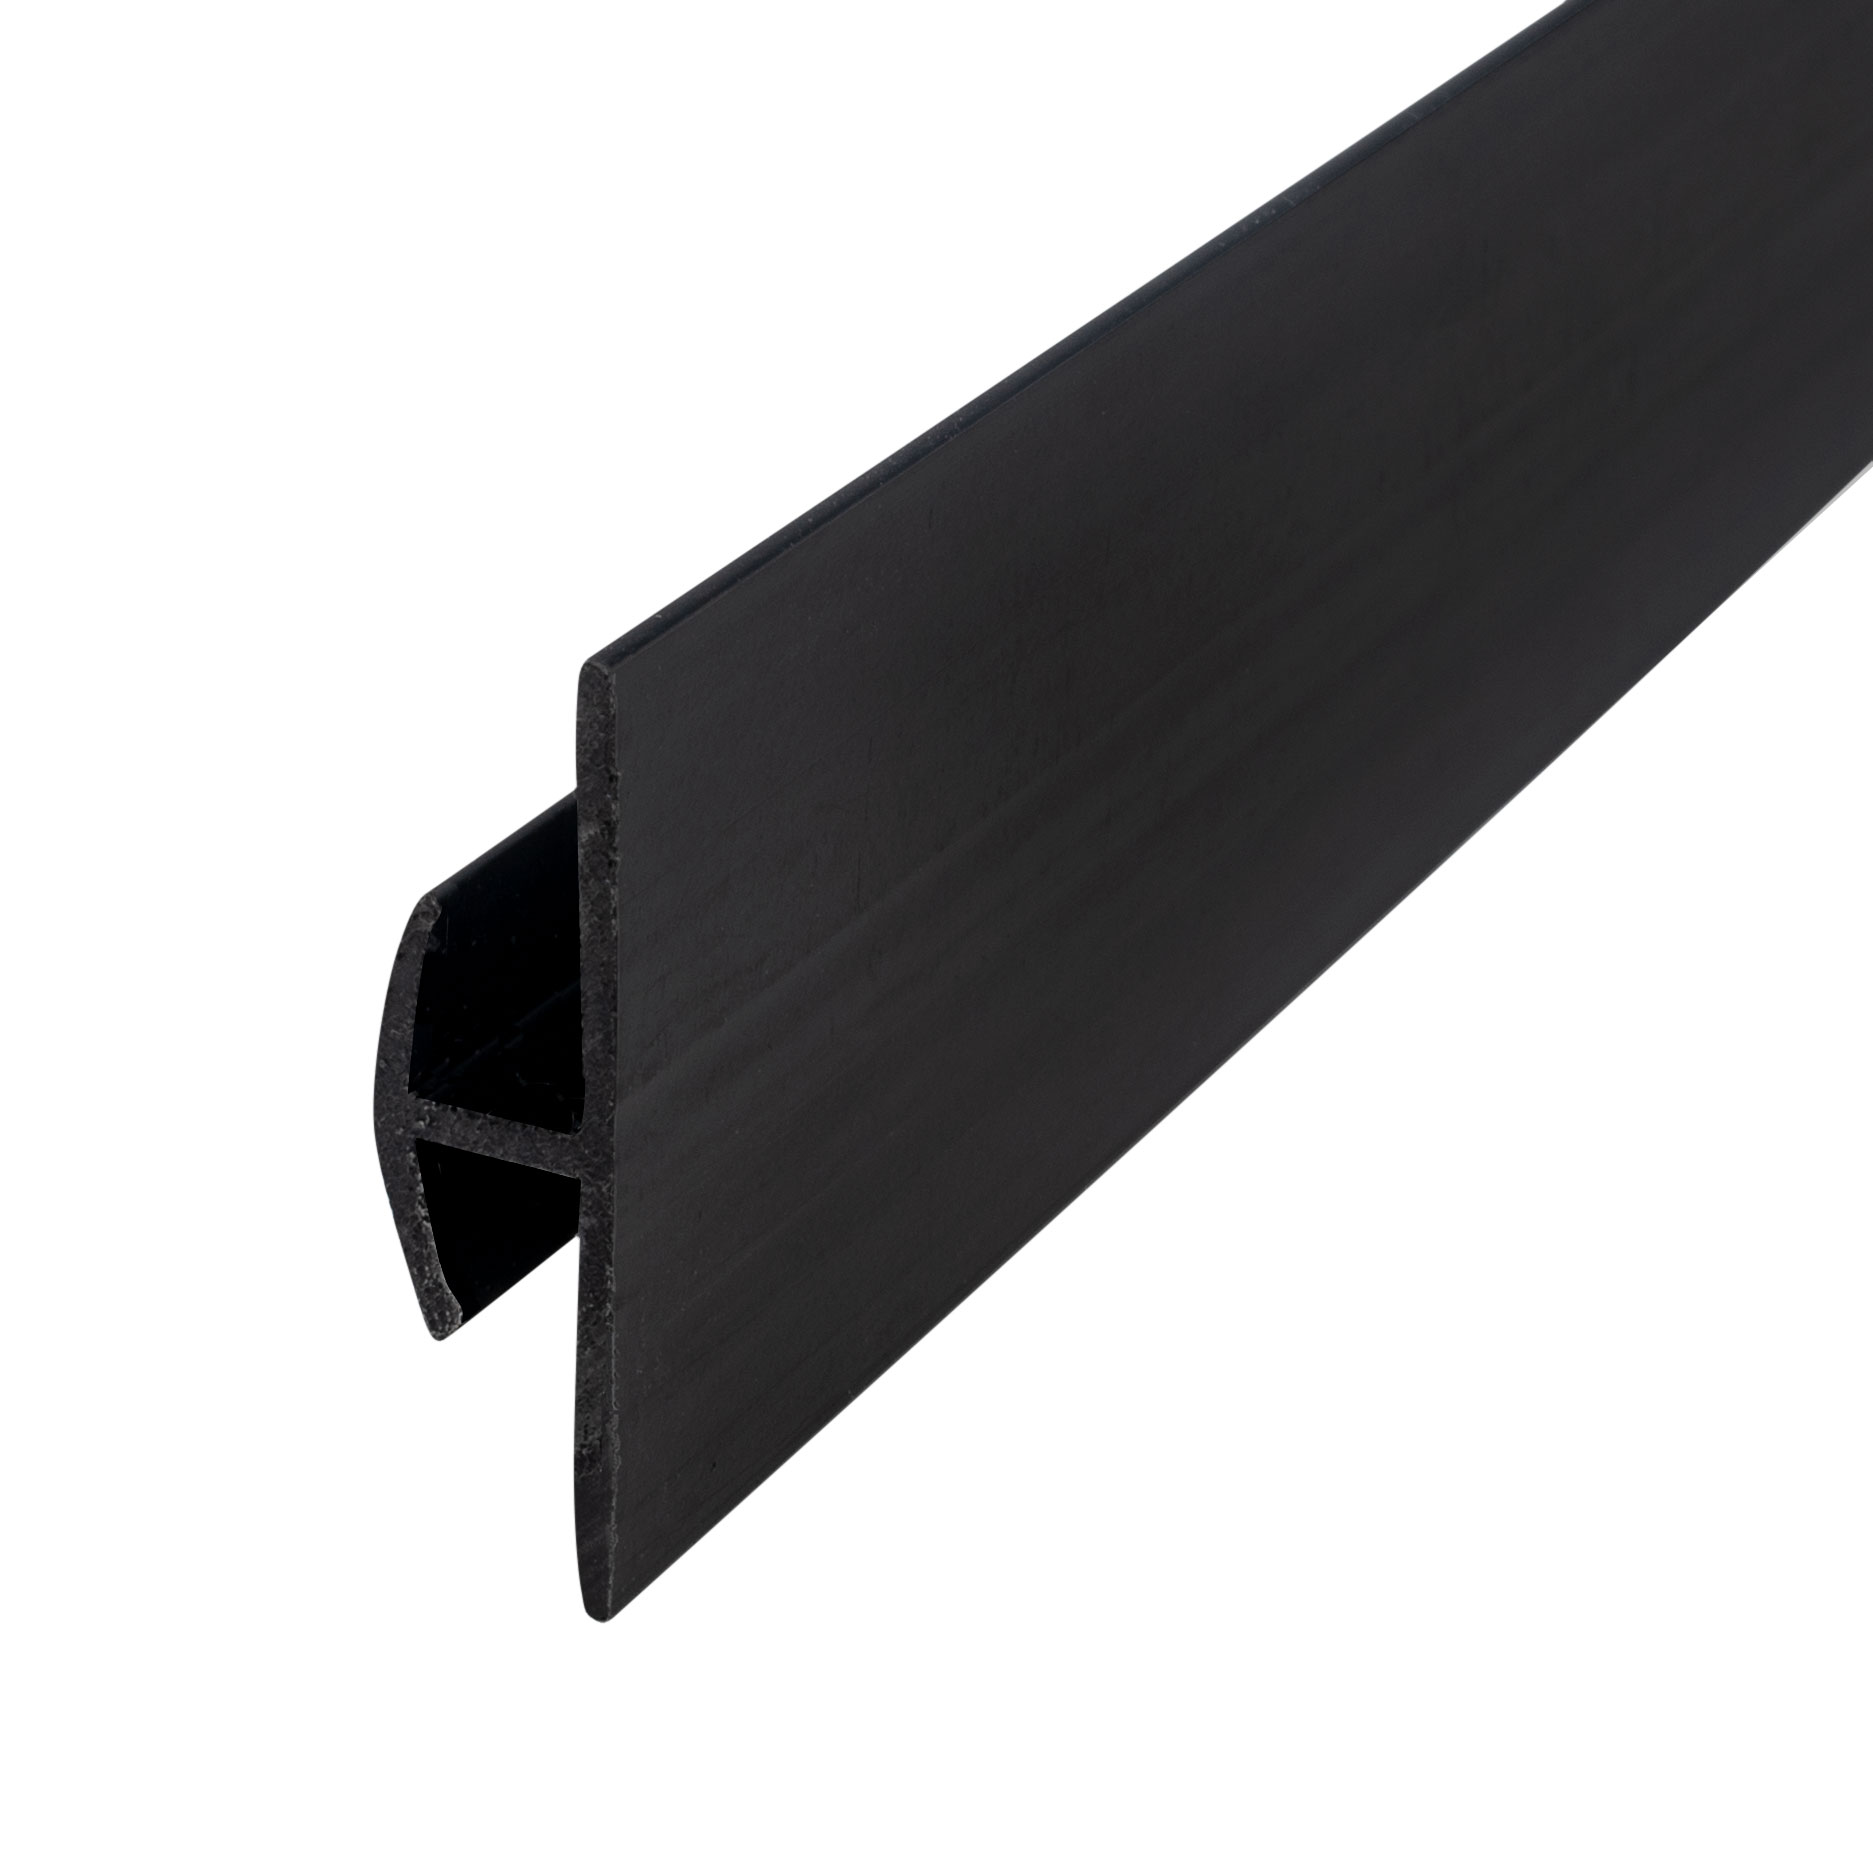 Outwater Plastic H Channel Fits Material 3/16 Inch Thick Black Styrene ...